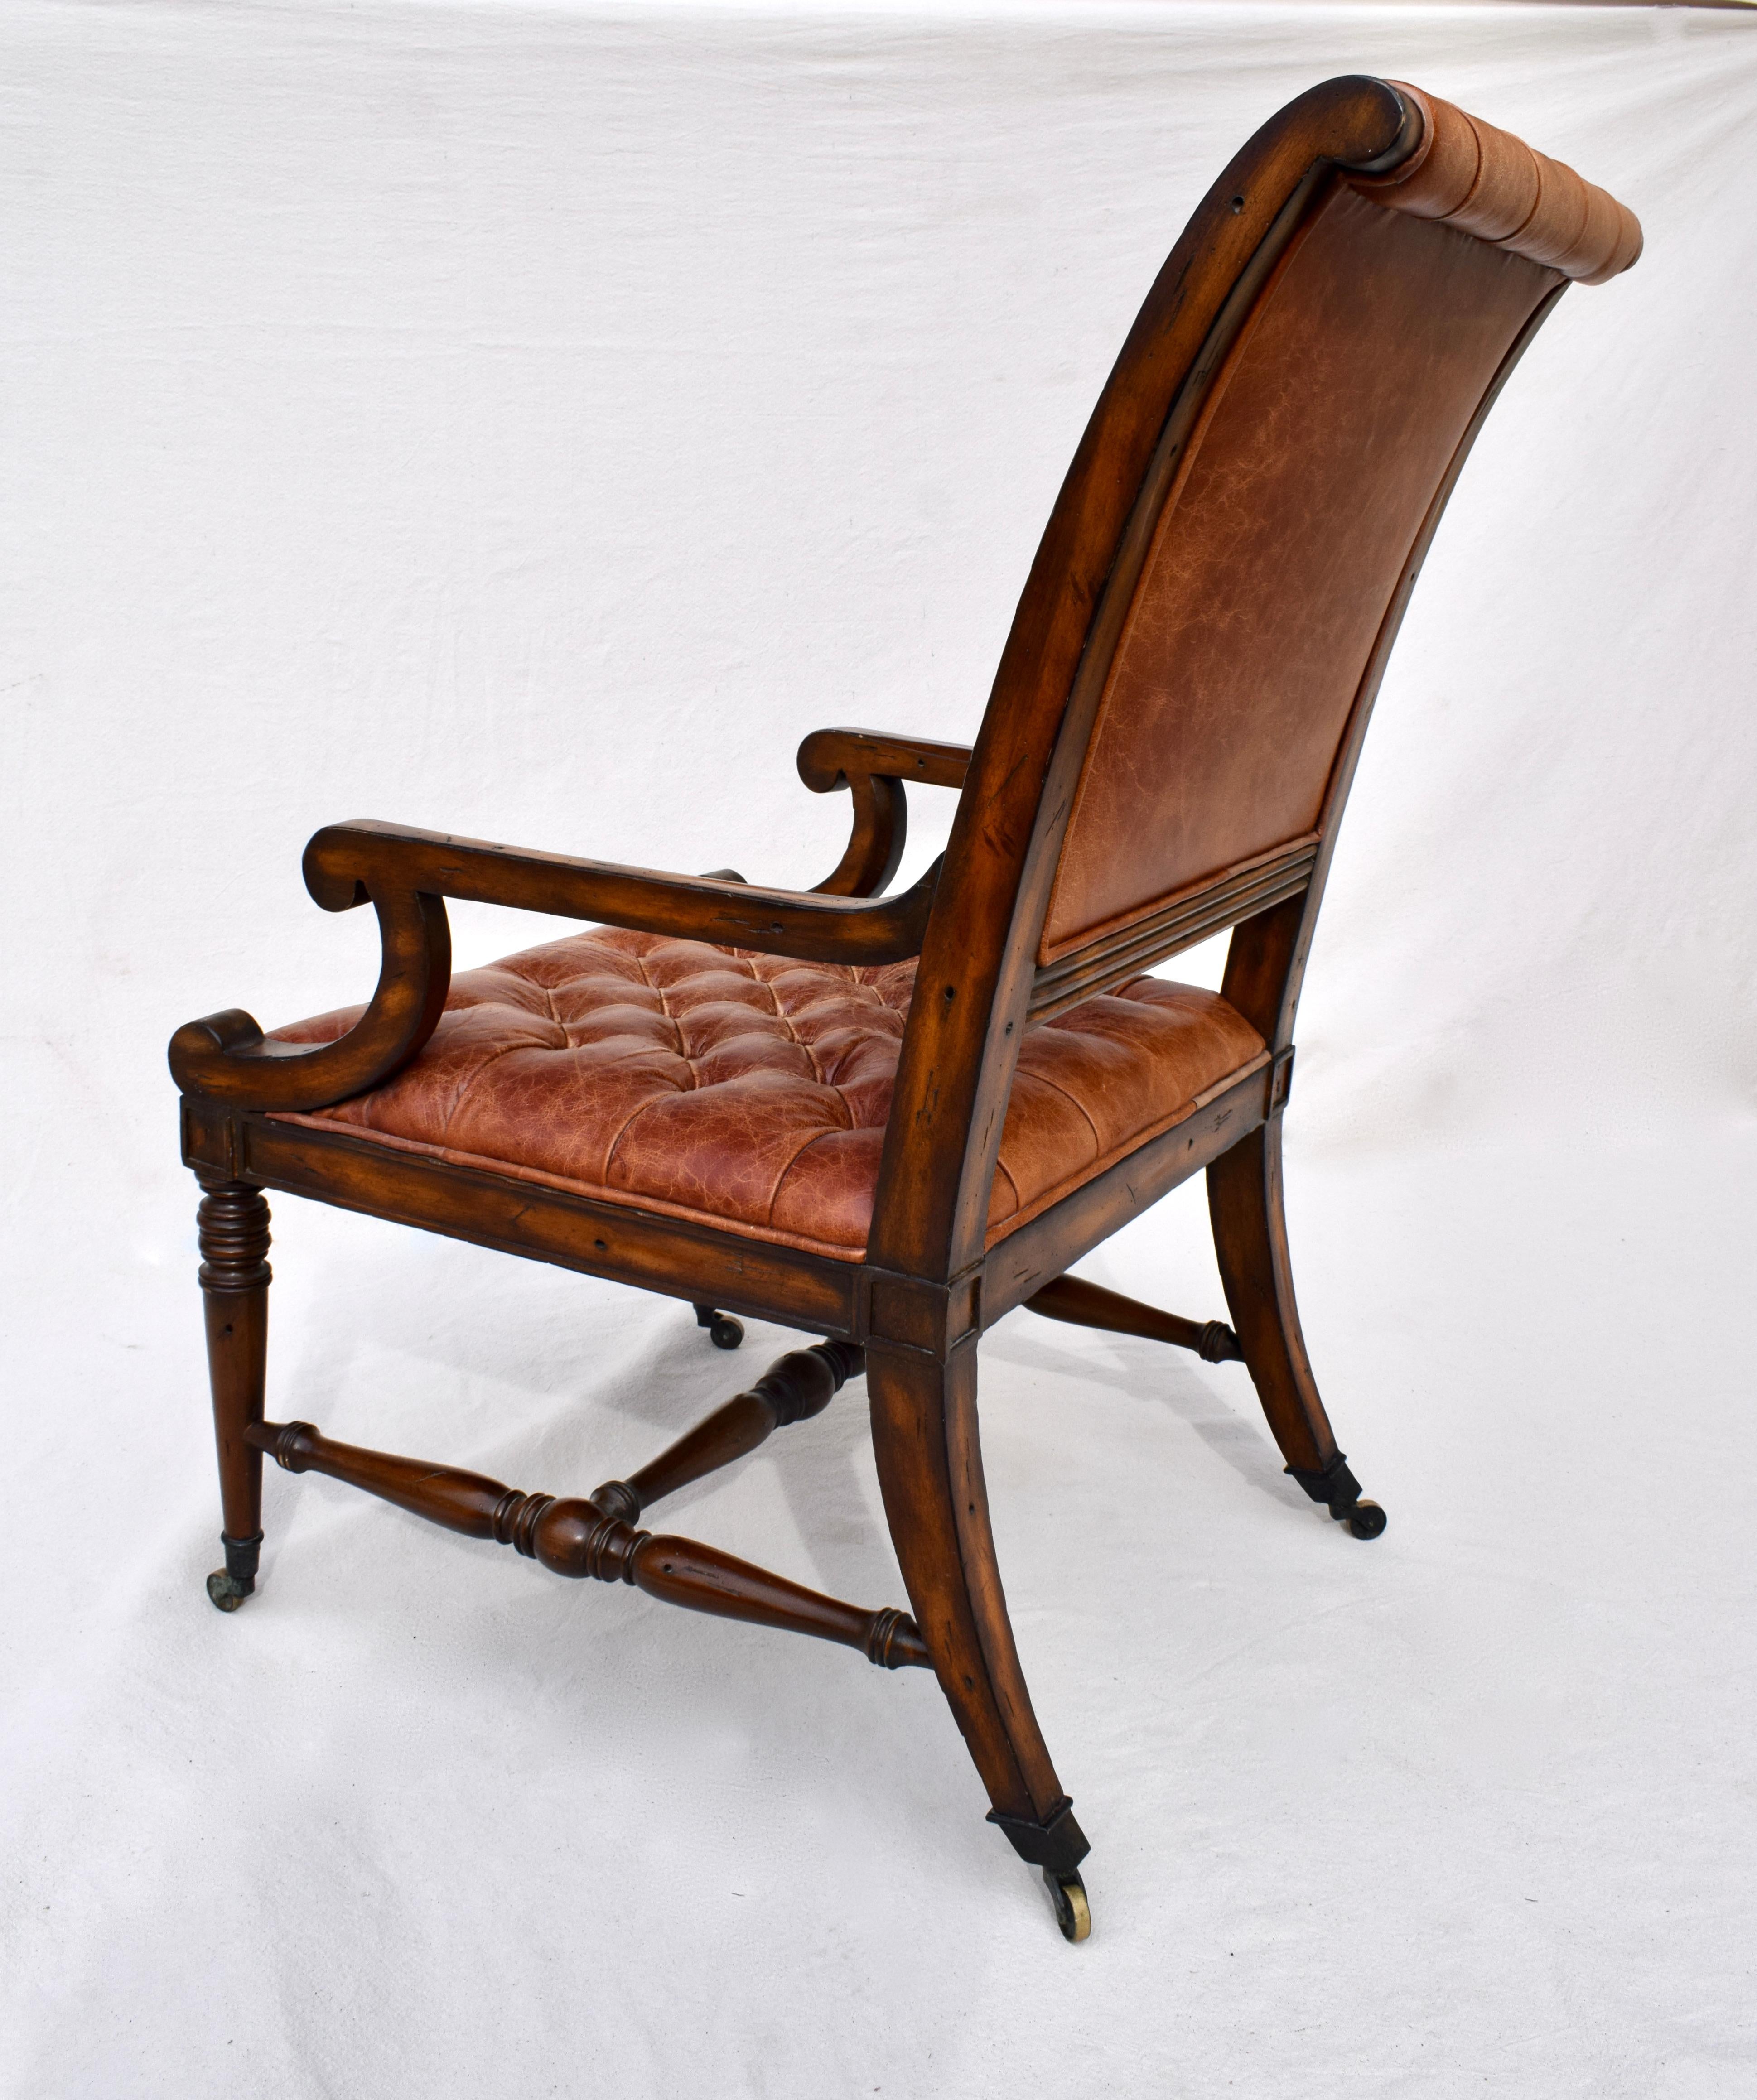 Late 20th Century English Regency Style Leather Library Chair on Brass Casters